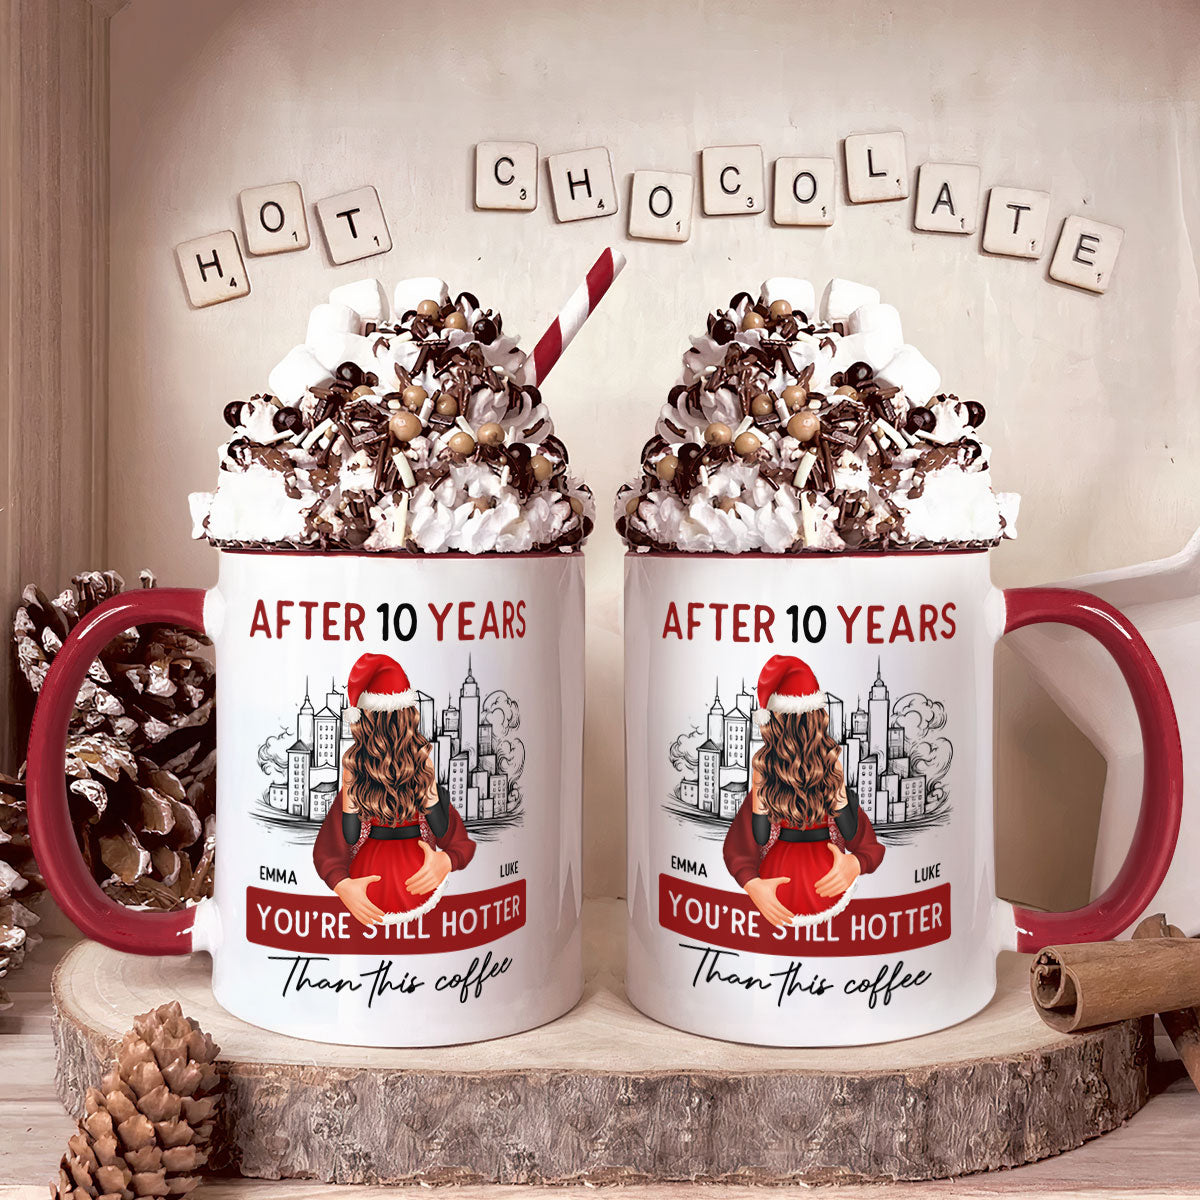 After 10 Years You're Still Hotter Than This Coffee - Personalized Accent Mug